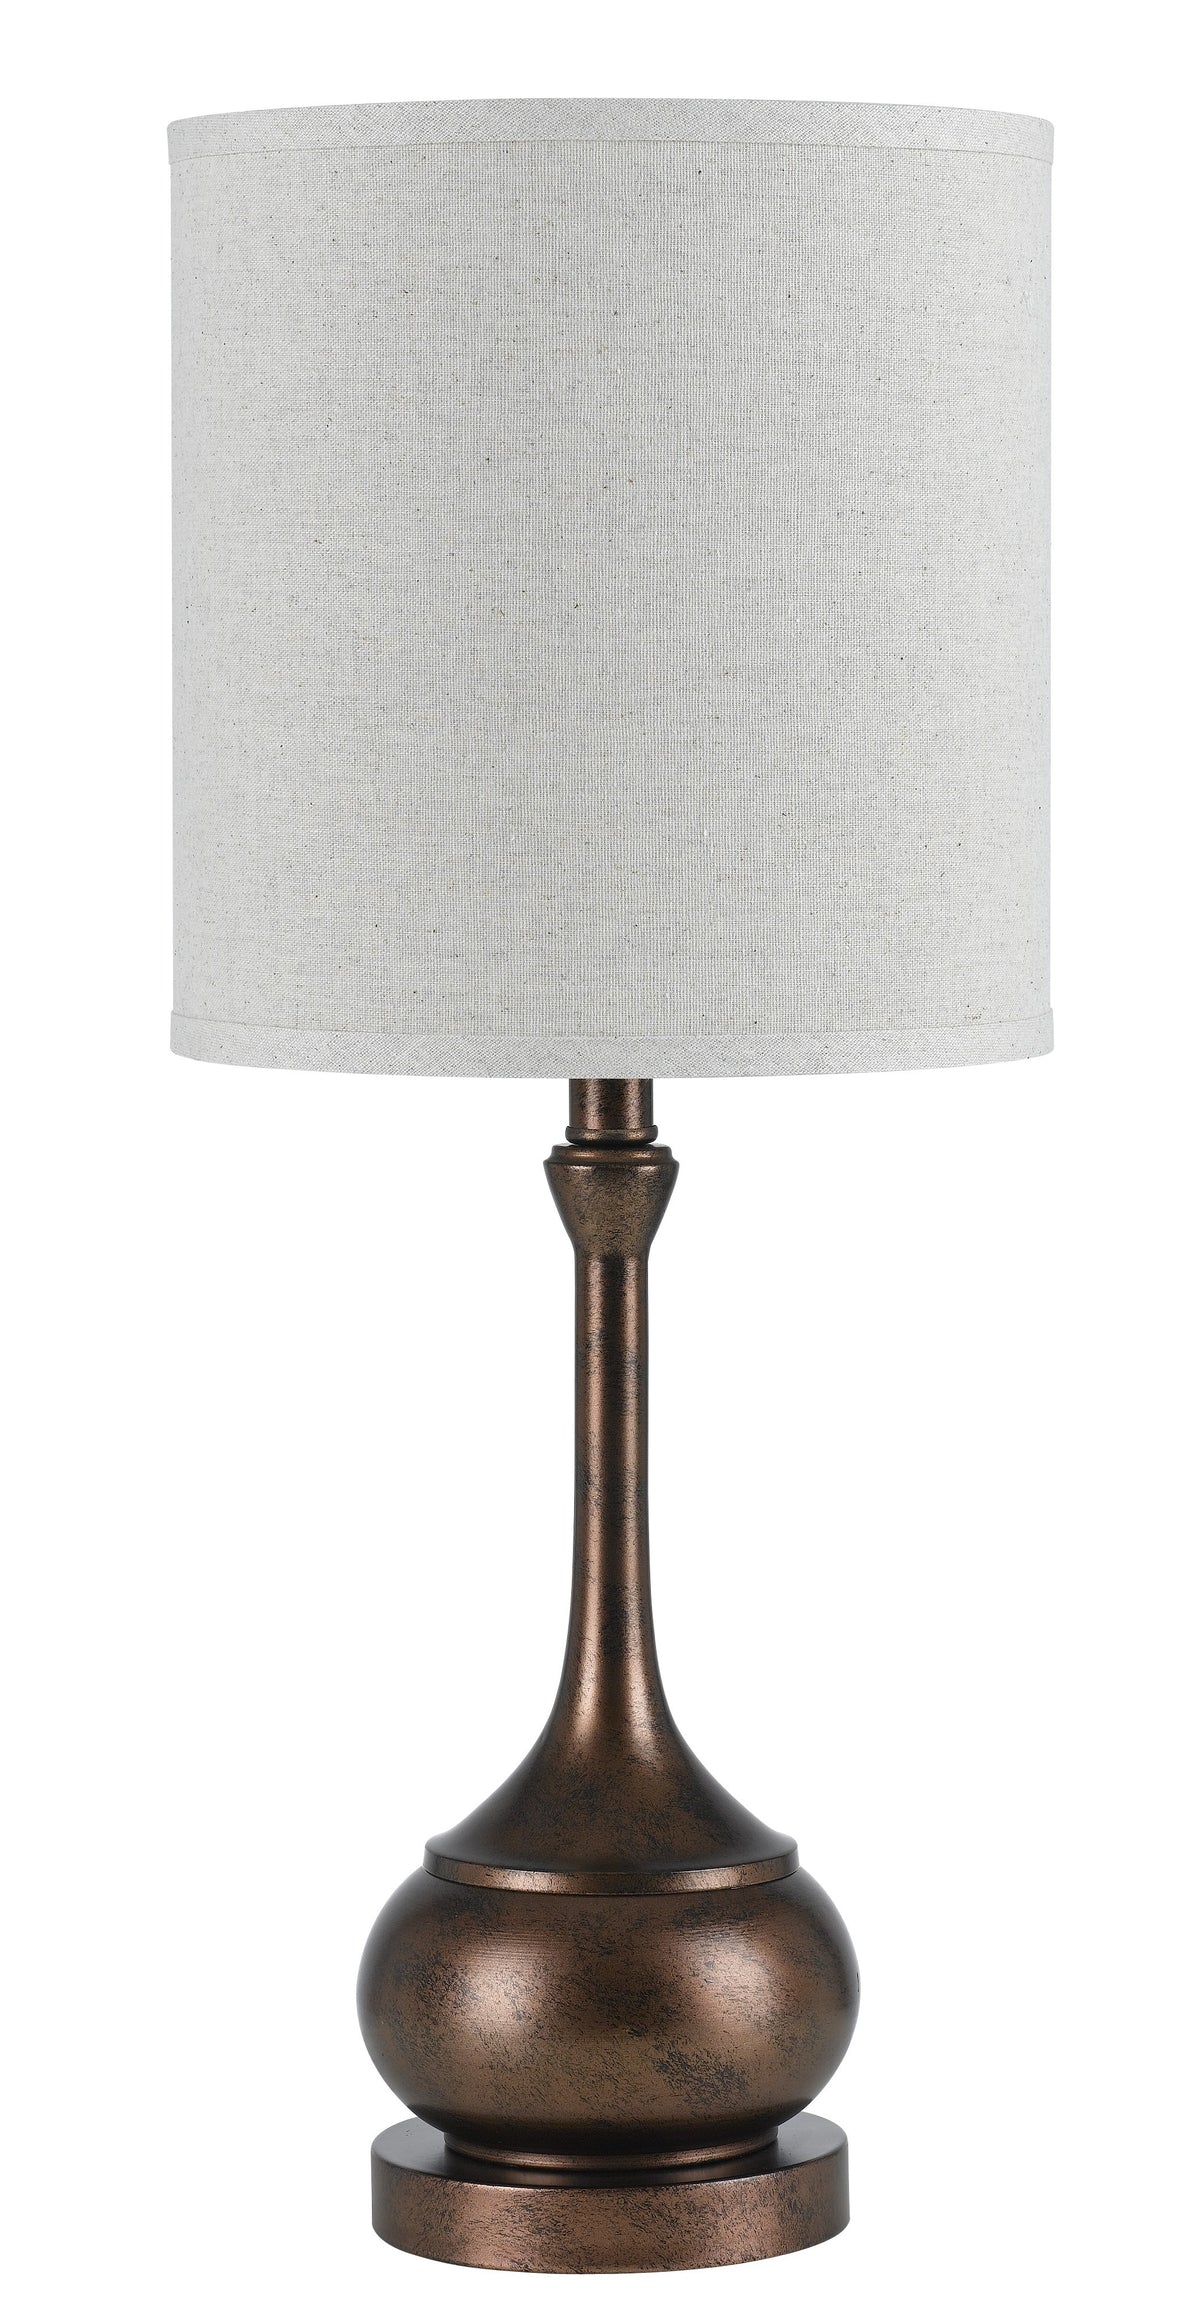 Elongated Bellied Shape Metal Accent Lamp with Drum Shade, Rustic Bronze - BM224926